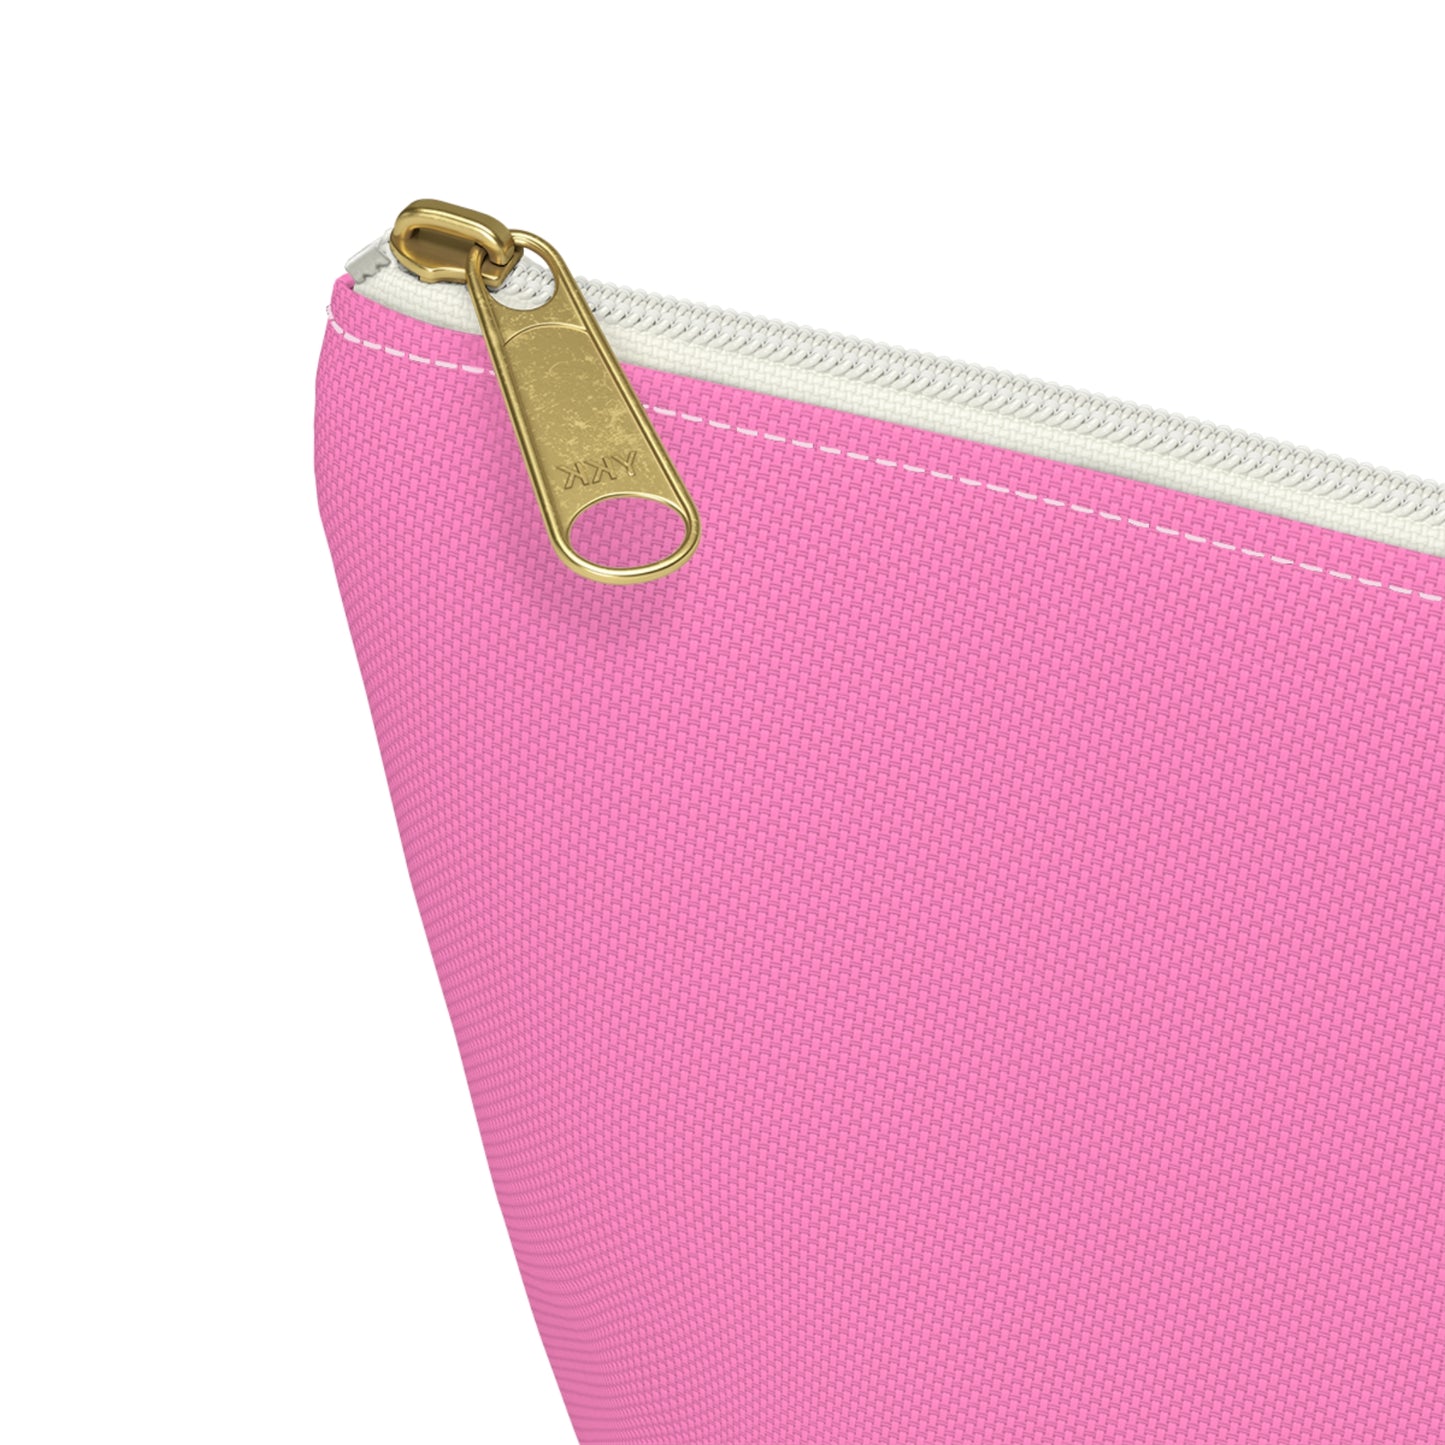 Rose Pink Accessory Pouch w/T-bottom